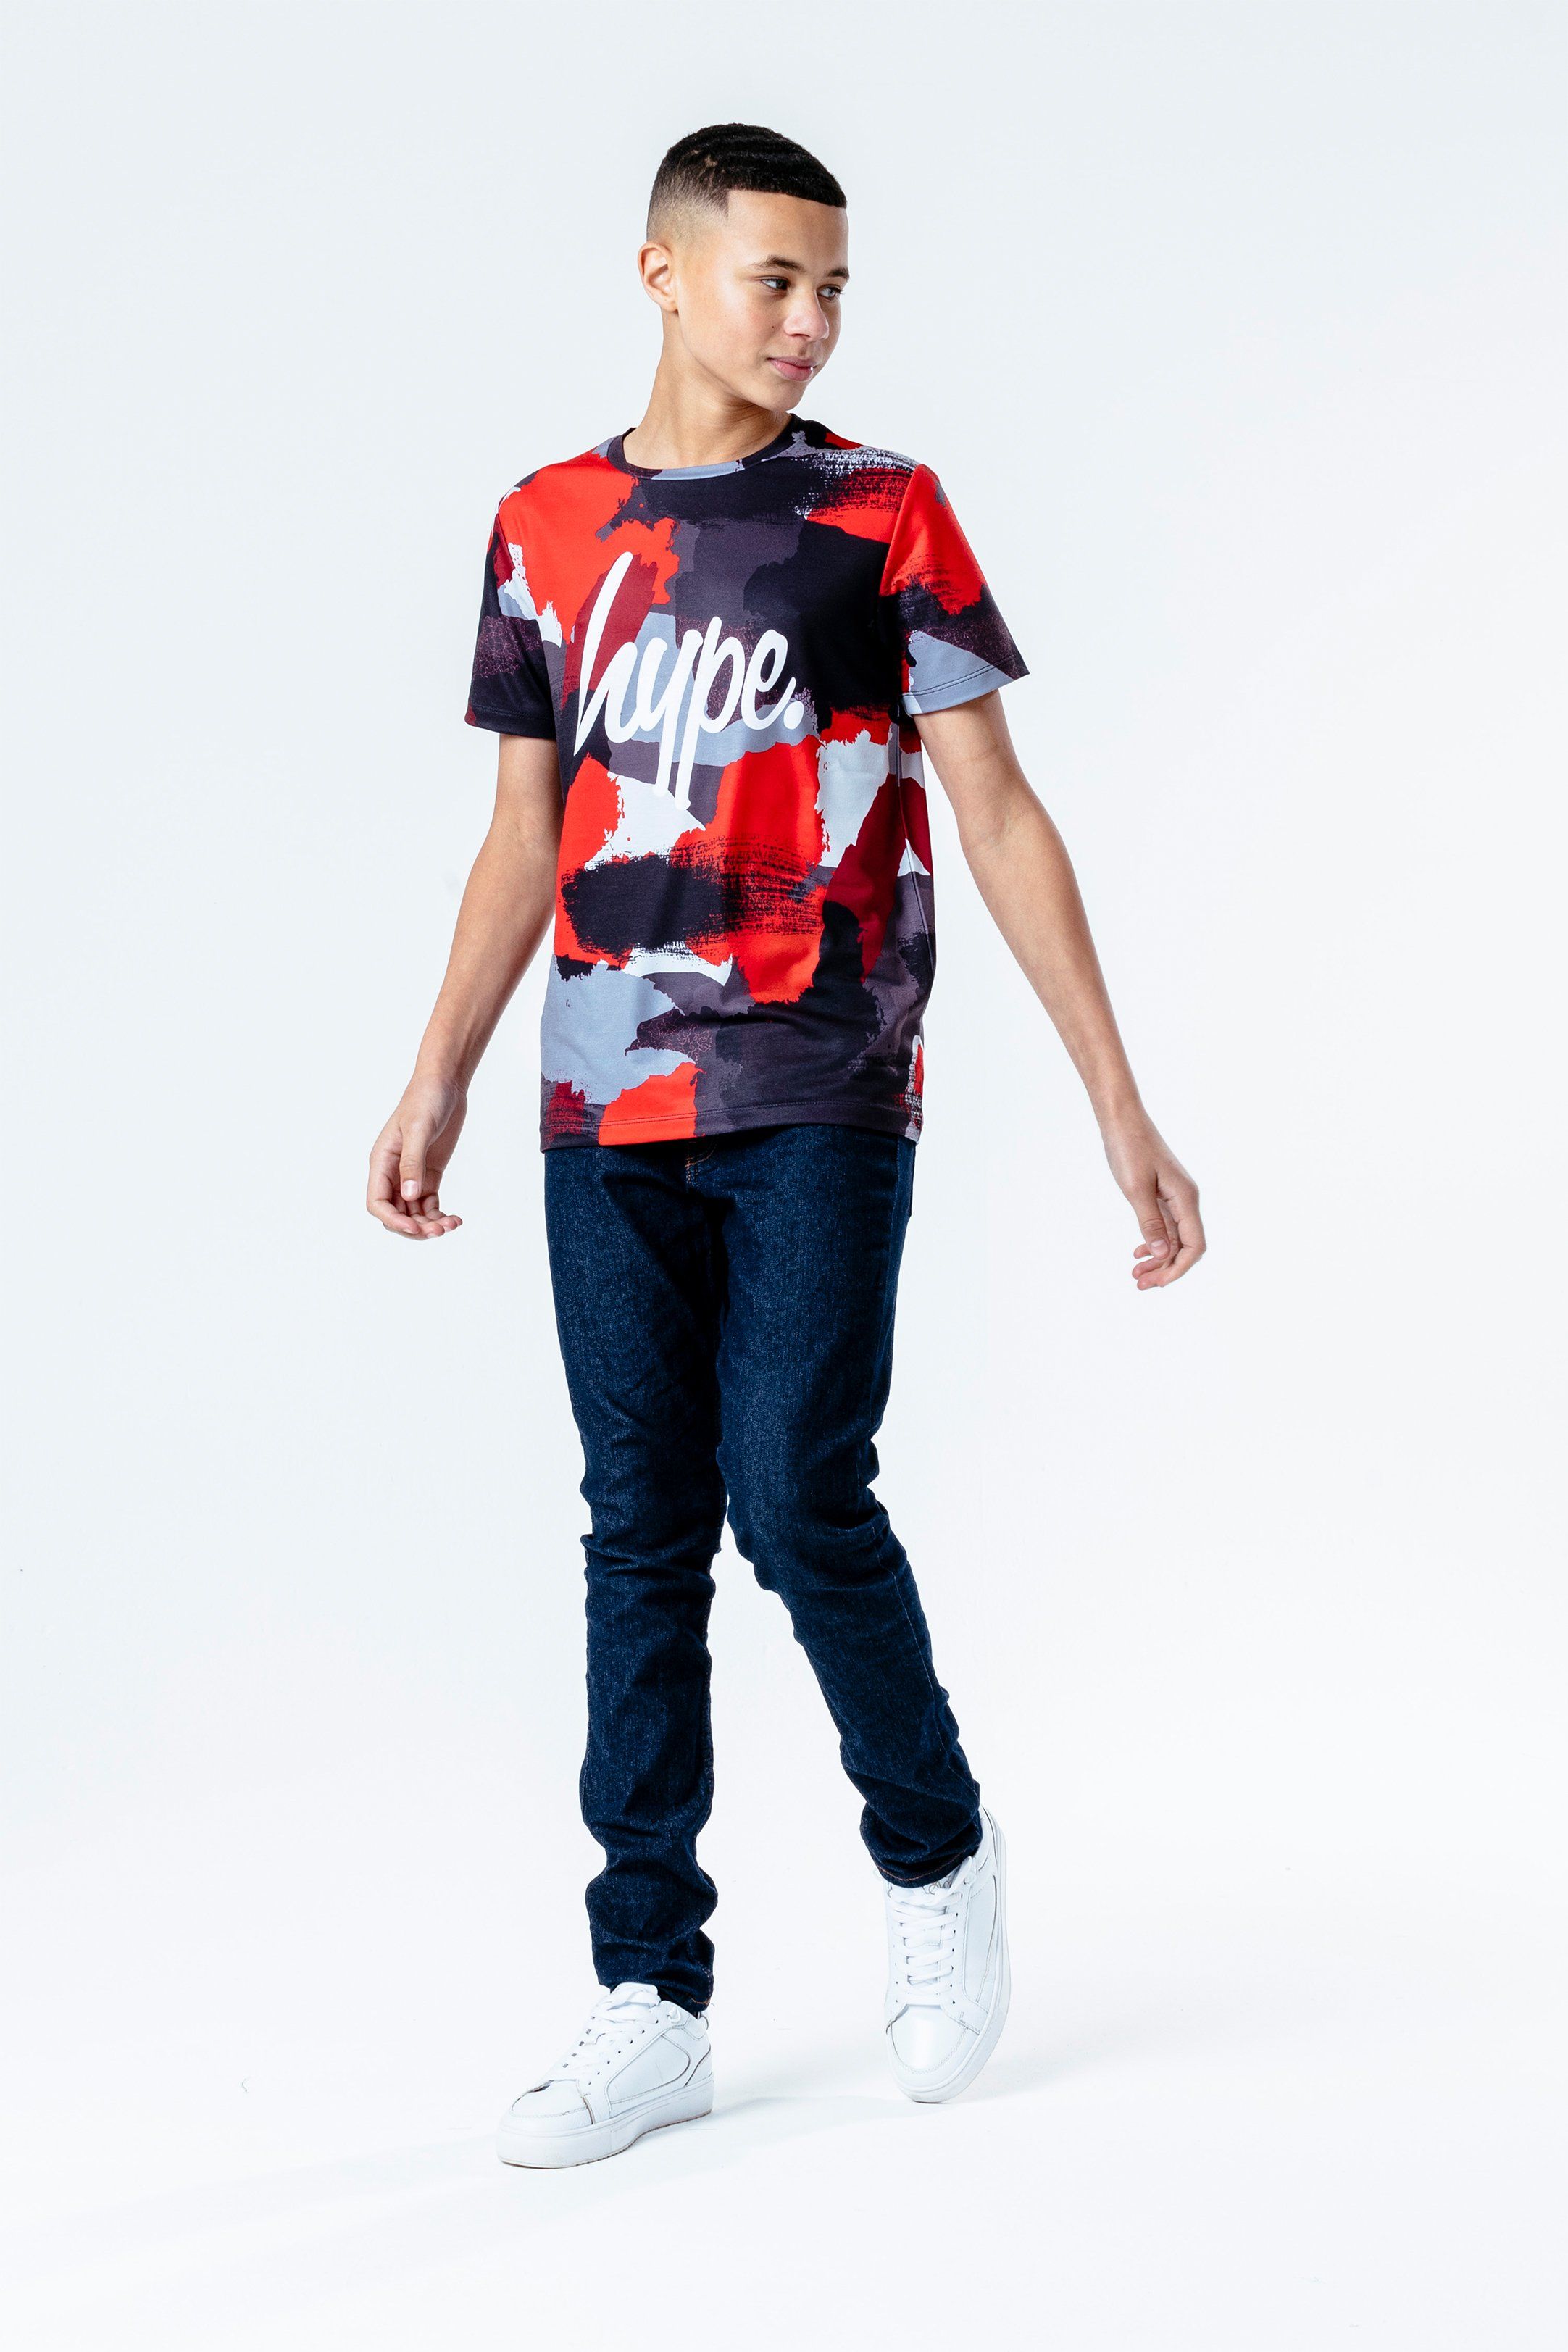 The HYPE. RED camo kids t-shirt features a red, burgundy, black and grey colour palette. Featuring a crew neck line, short sleeves and the iconic HYPE. script logo across the front in a contrasting white. Highlighting our signature all-over camo print. For a casual look, wear with a pair of sweat joggers, or if you're after a smarter look, a pair of skinny fit denim jeans and box fresh kicks. Machine wash at 30 degrees.